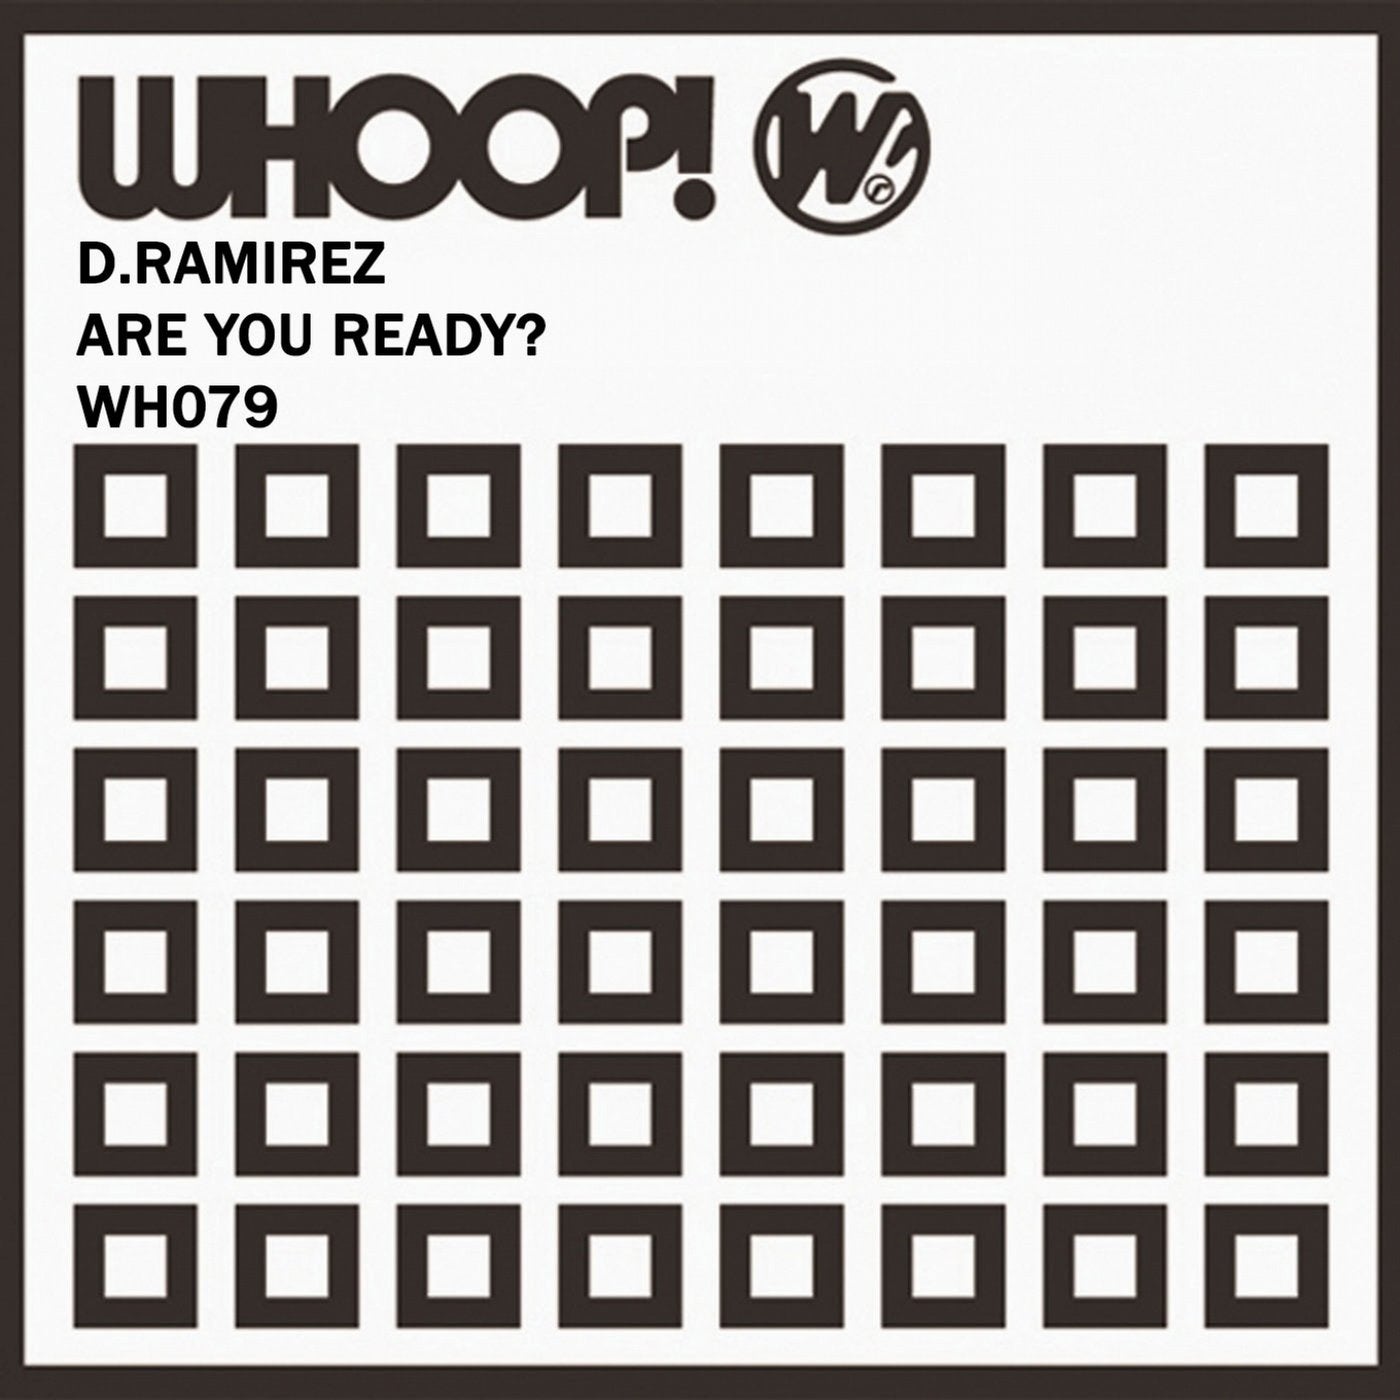 Are You Ready (Remixes)